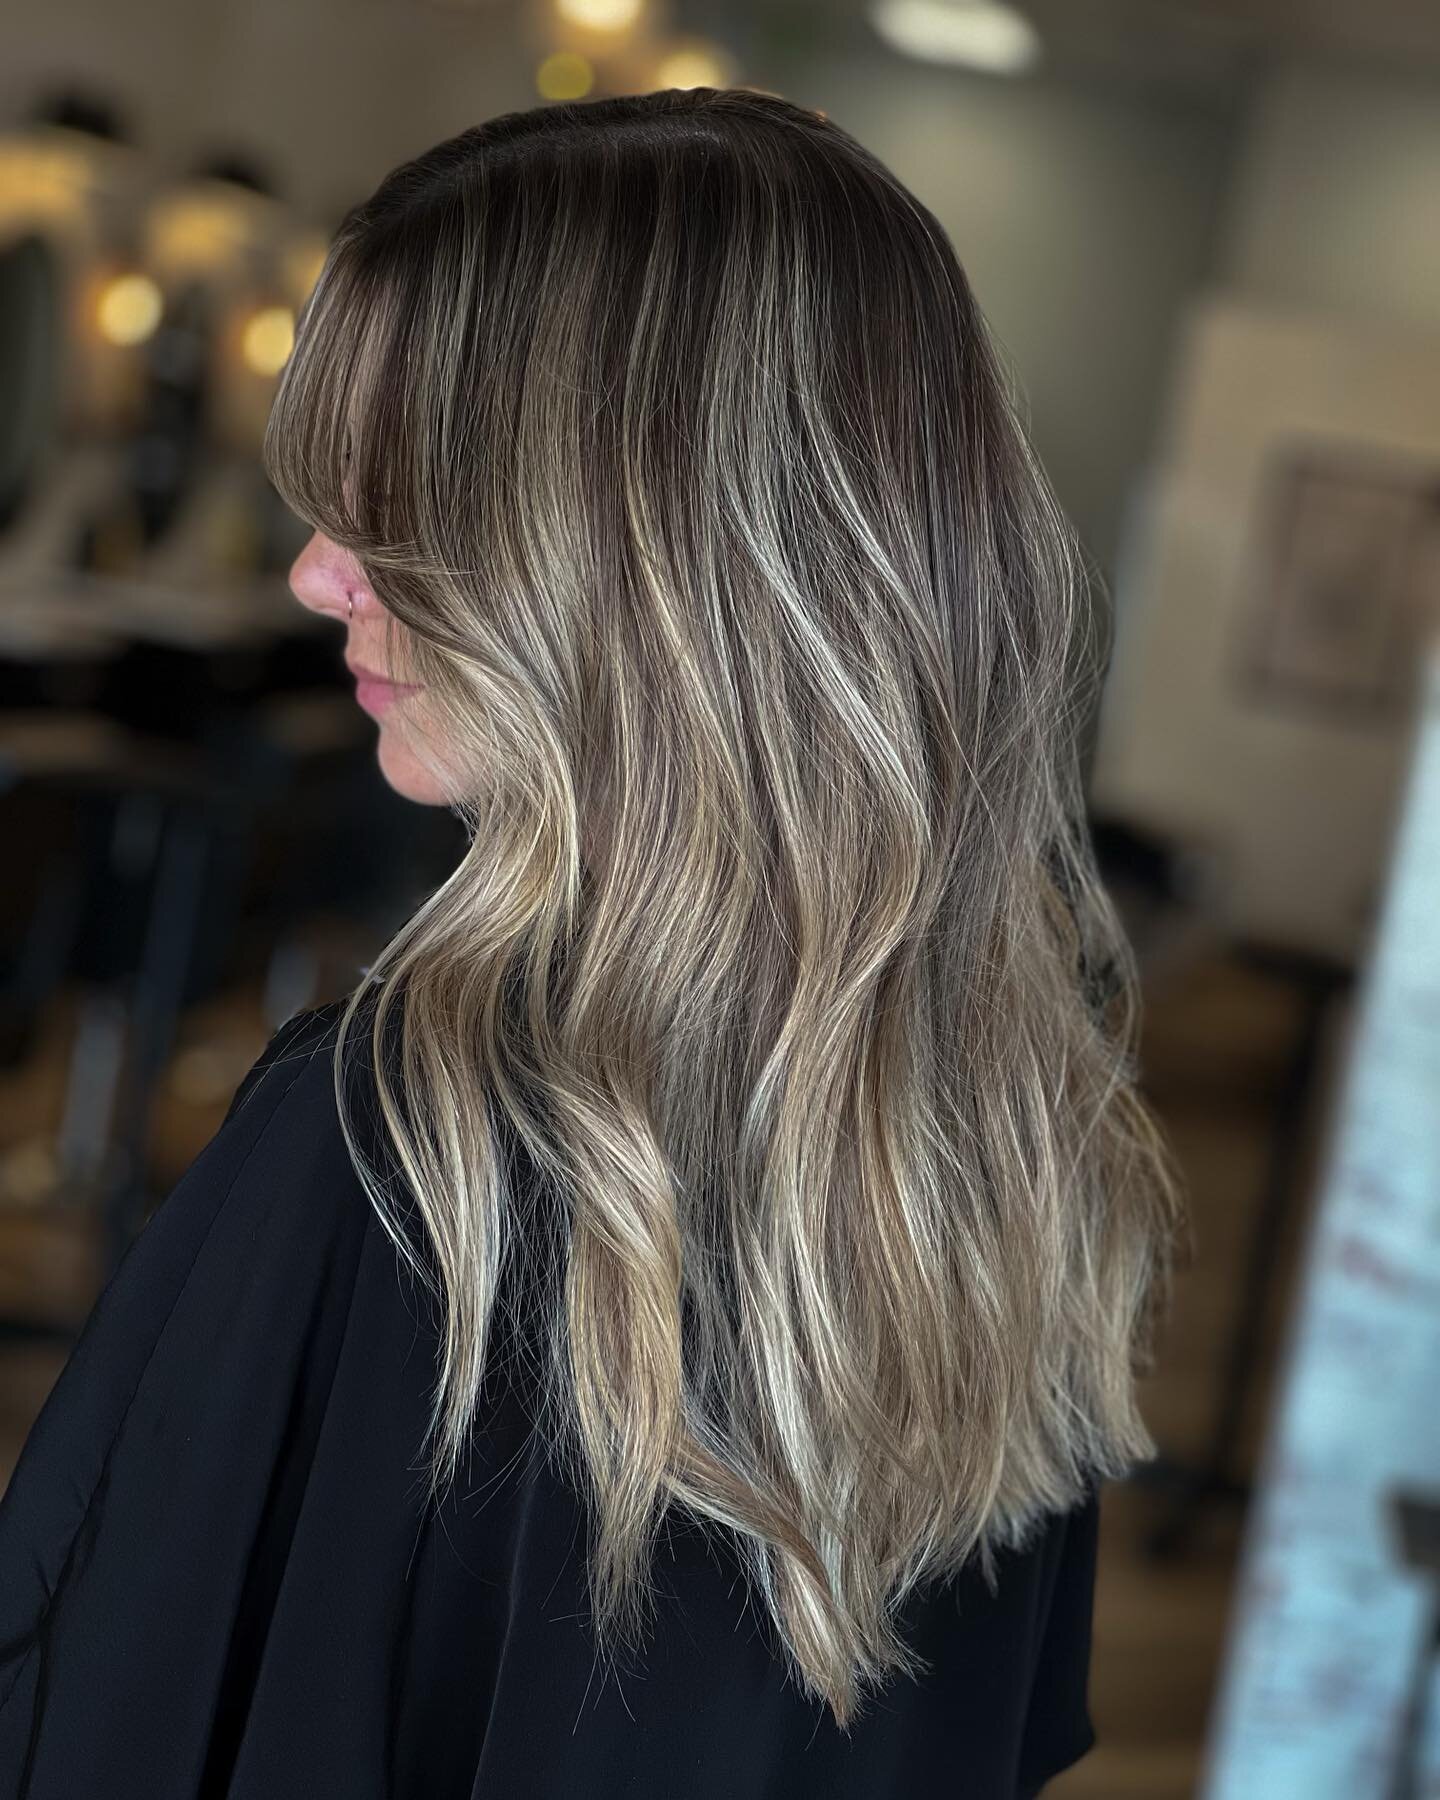 All we can say is wow 🤩 beautiful work done by @tayeveretthair ✨ click the link in our bio to book with Taylor!